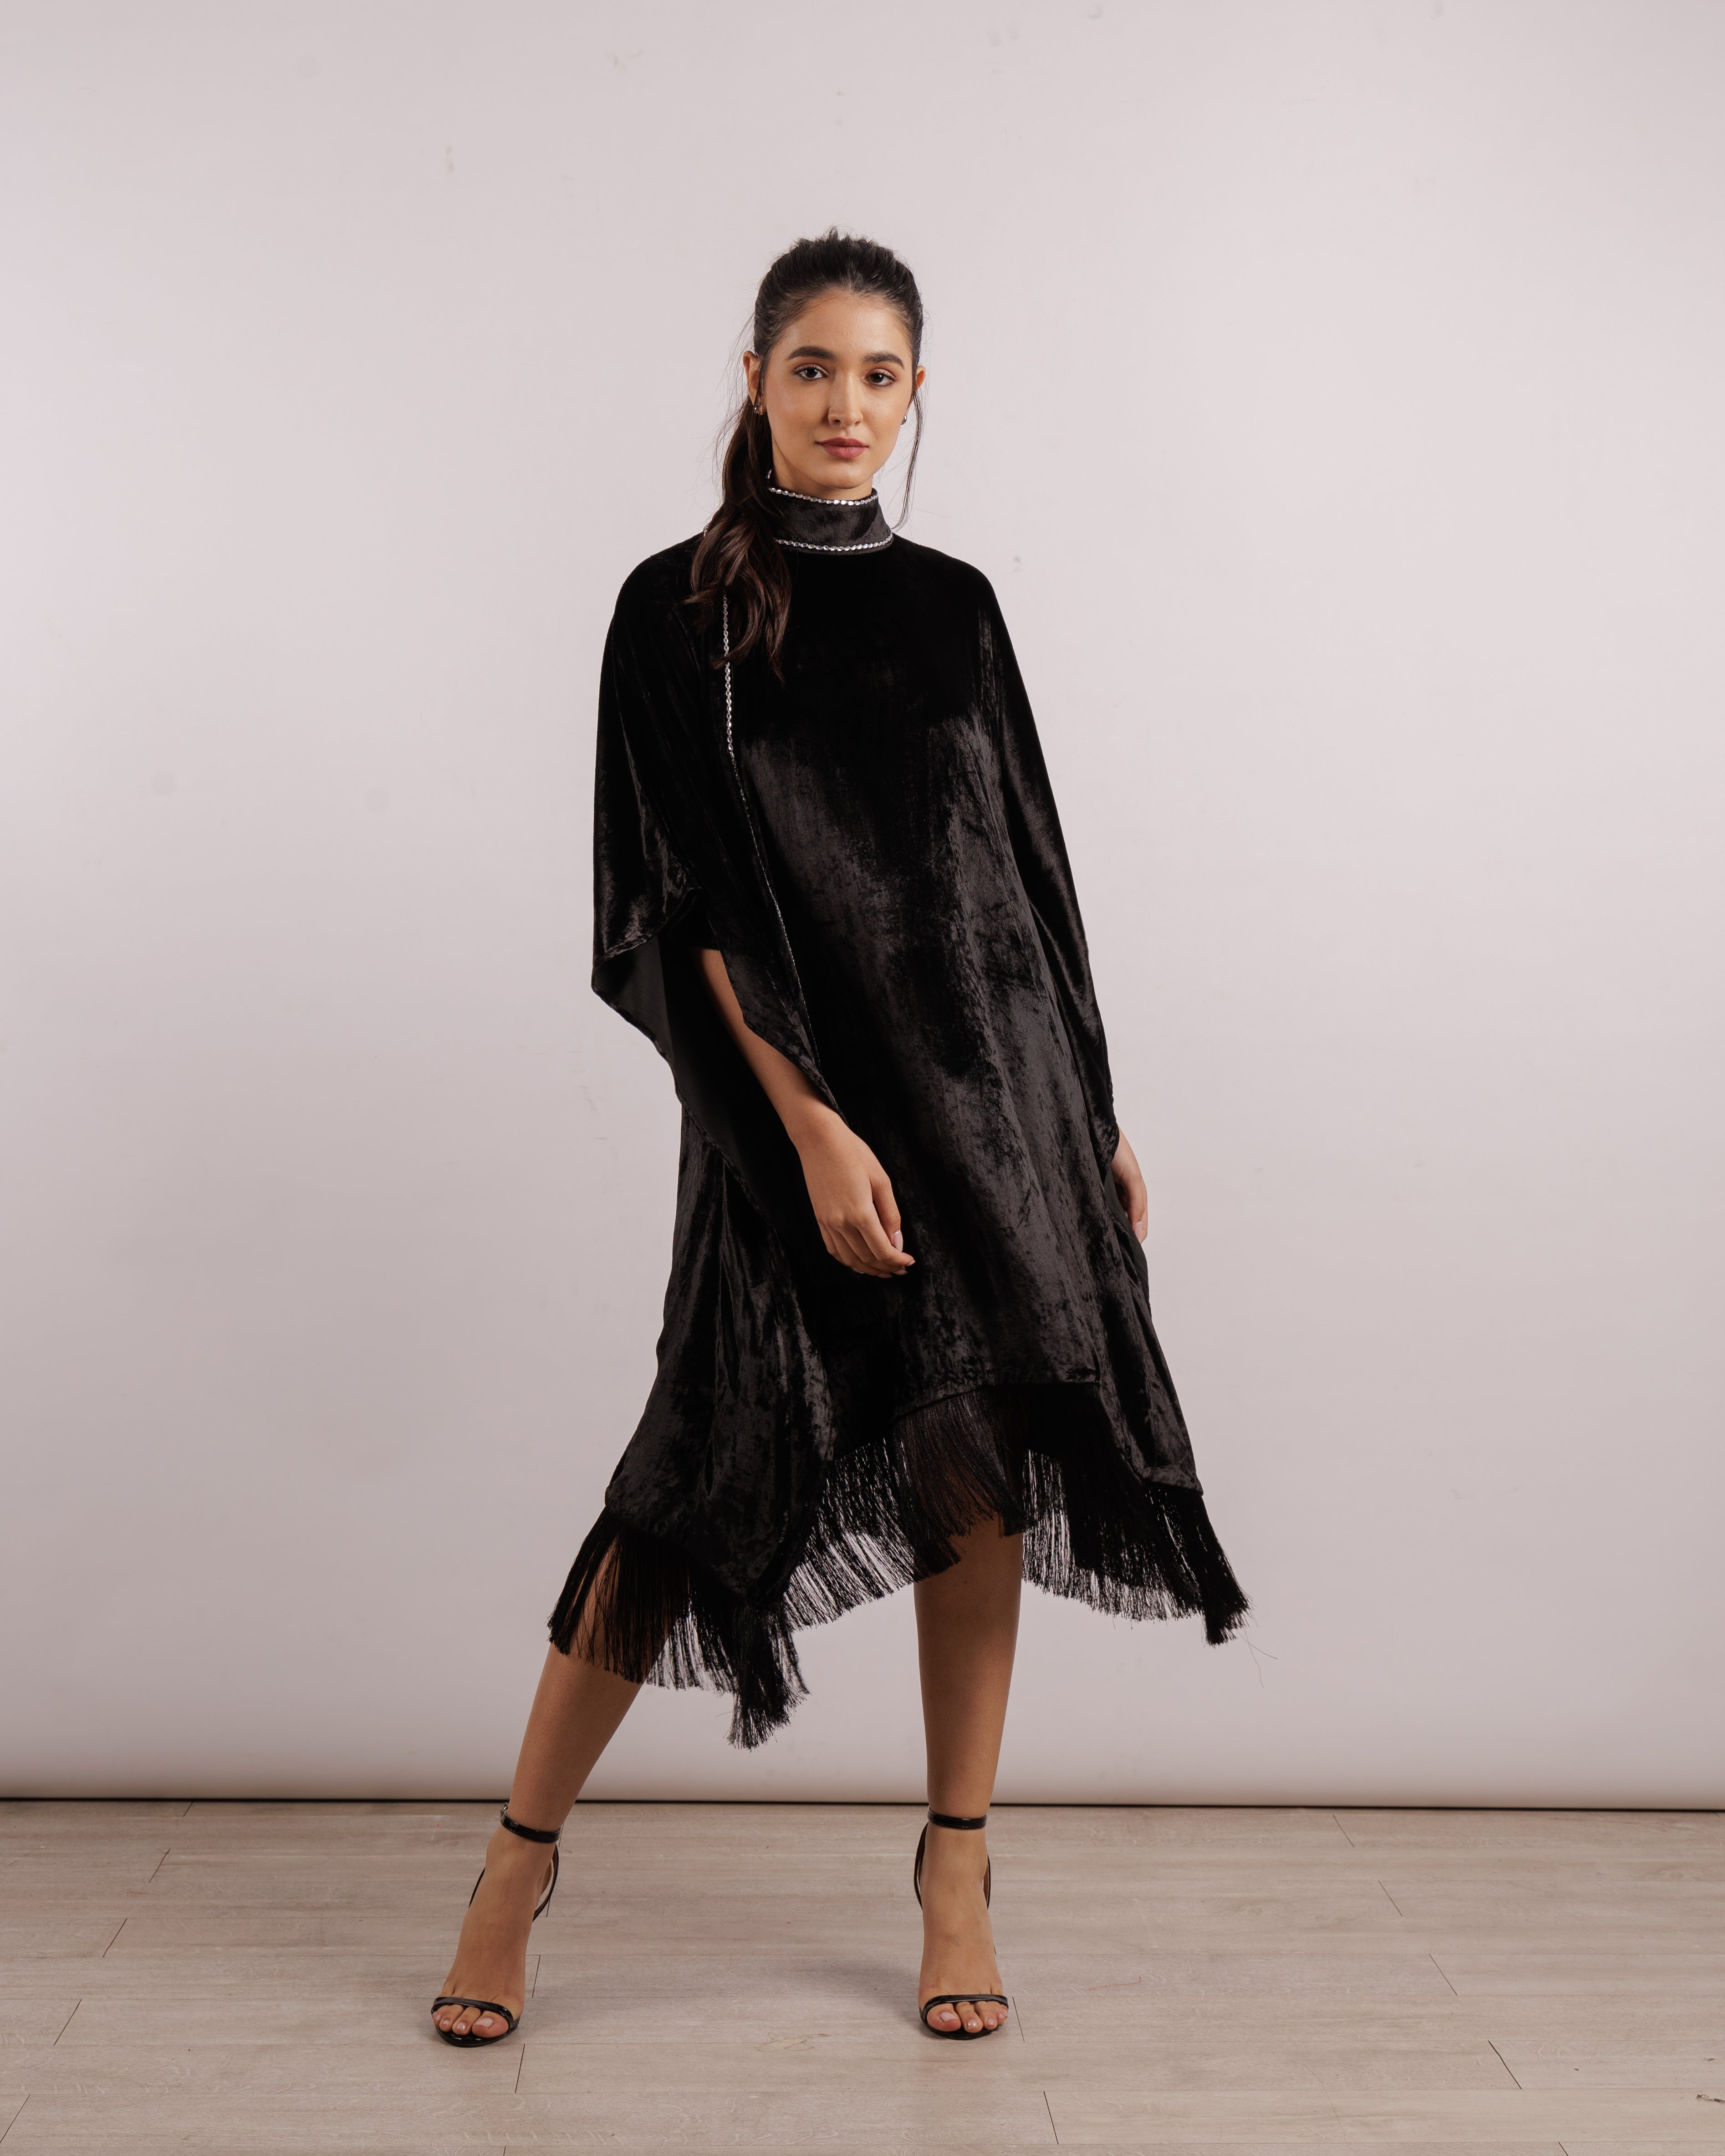 Shop Saree Capes for Women Online from India's Luxury Designers 2024